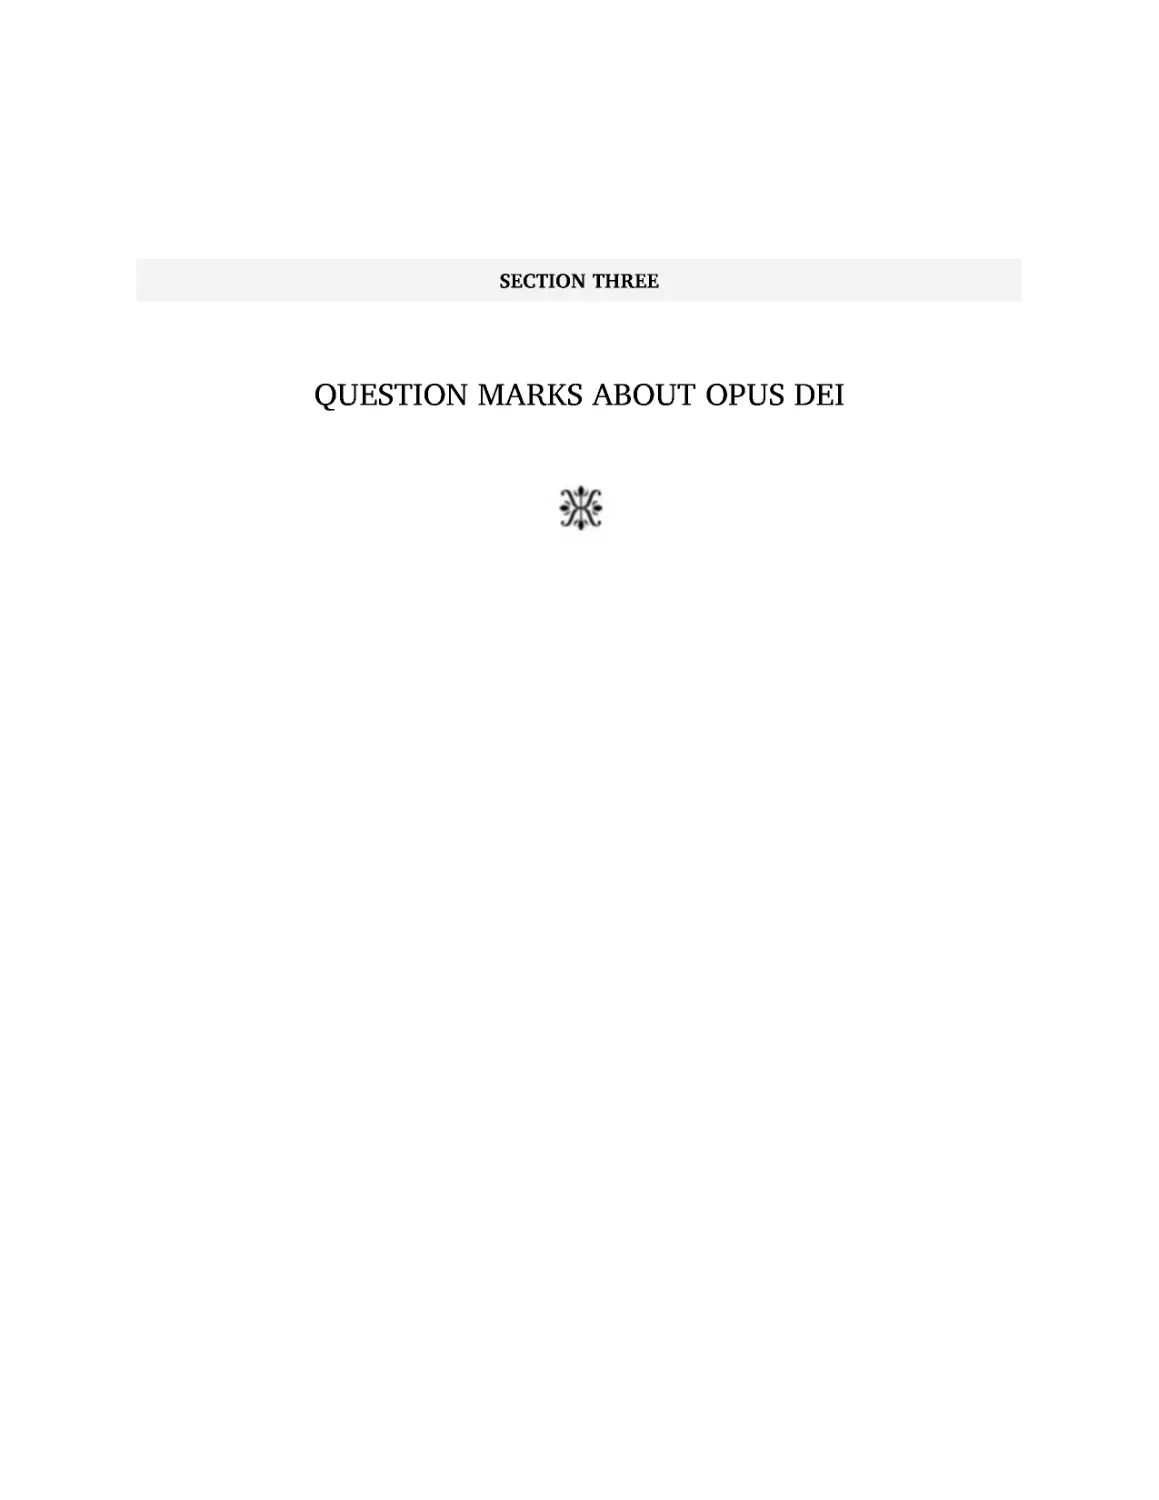 Section Three: Question Marks About Opus Dei